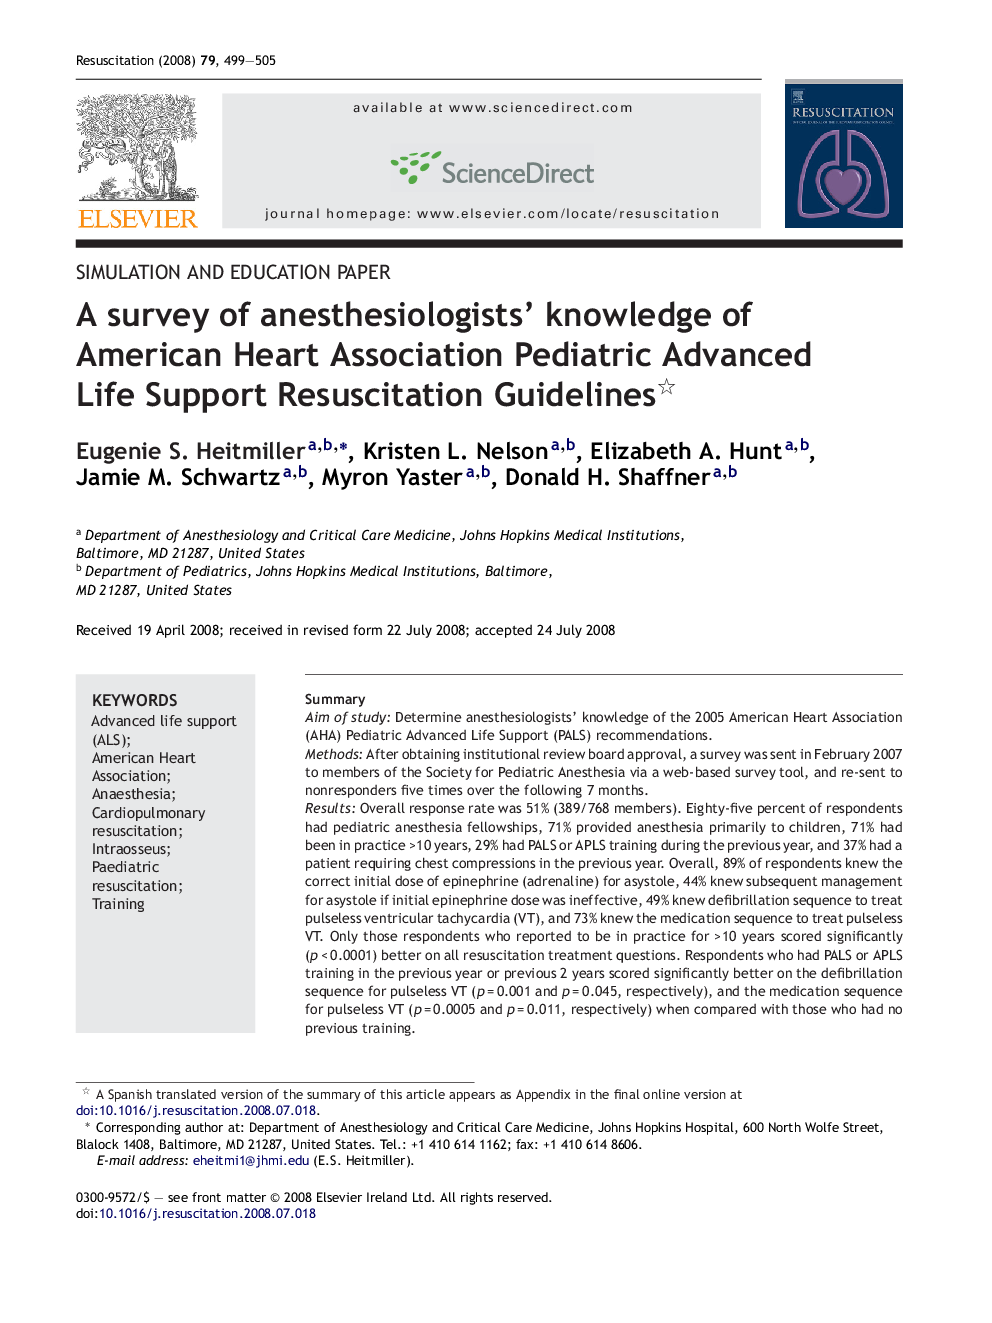 A survey of anesthesiologists’ knowledge of American Heart Association Pediatric Advanced Life Support Resuscitation Guidelines 